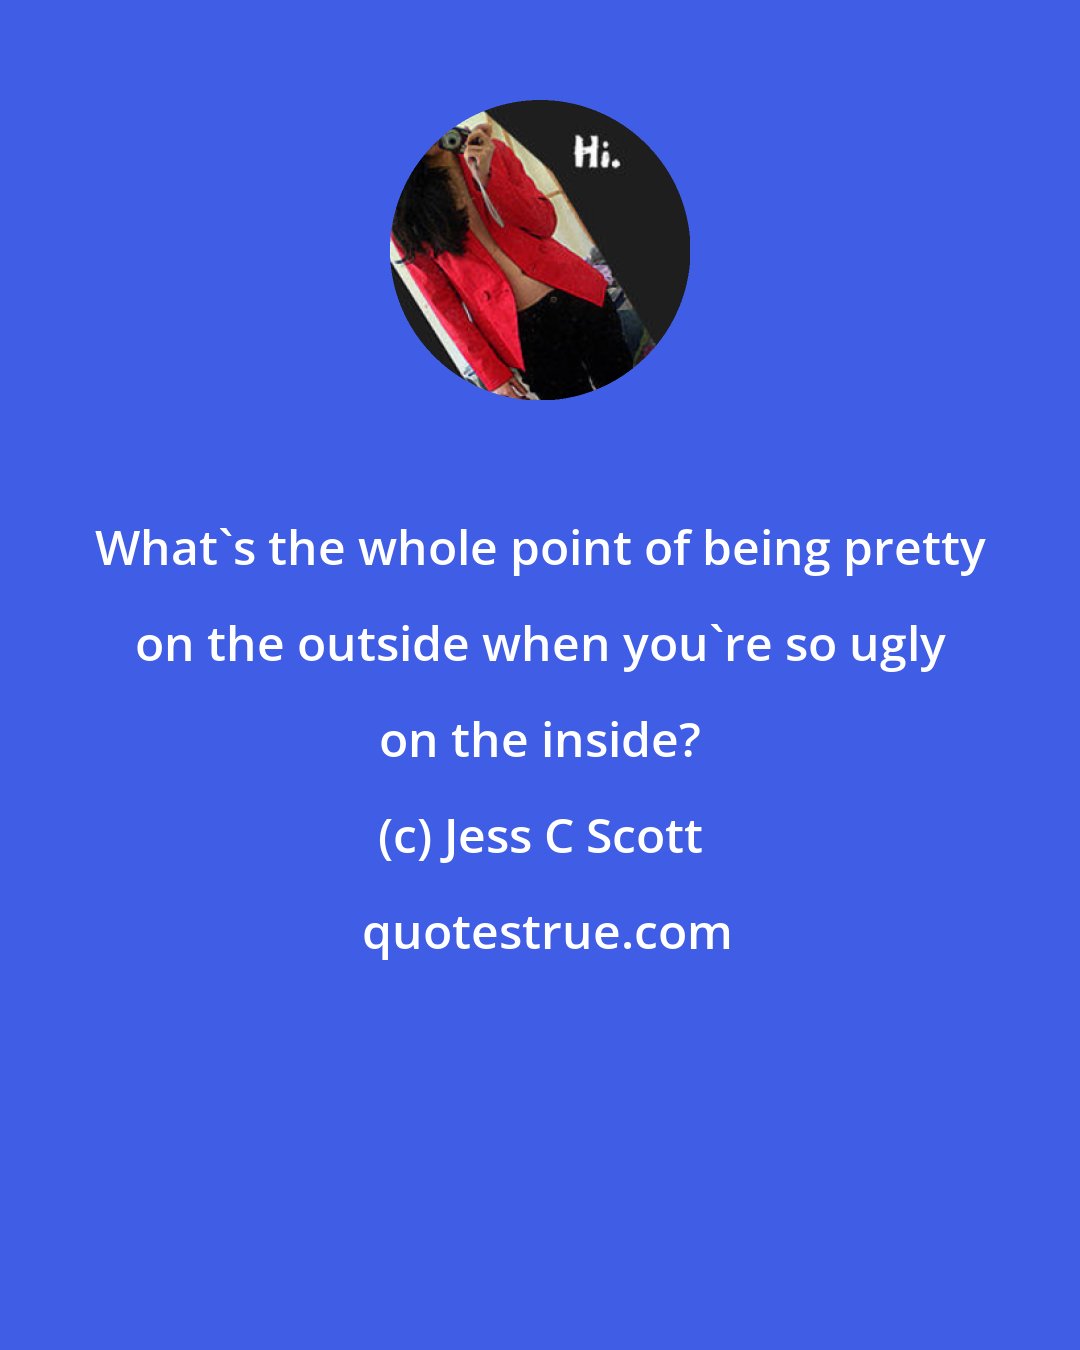 Jess C Scott: What's the whole point of being pretty on the outside when you're so ugly on the inside?